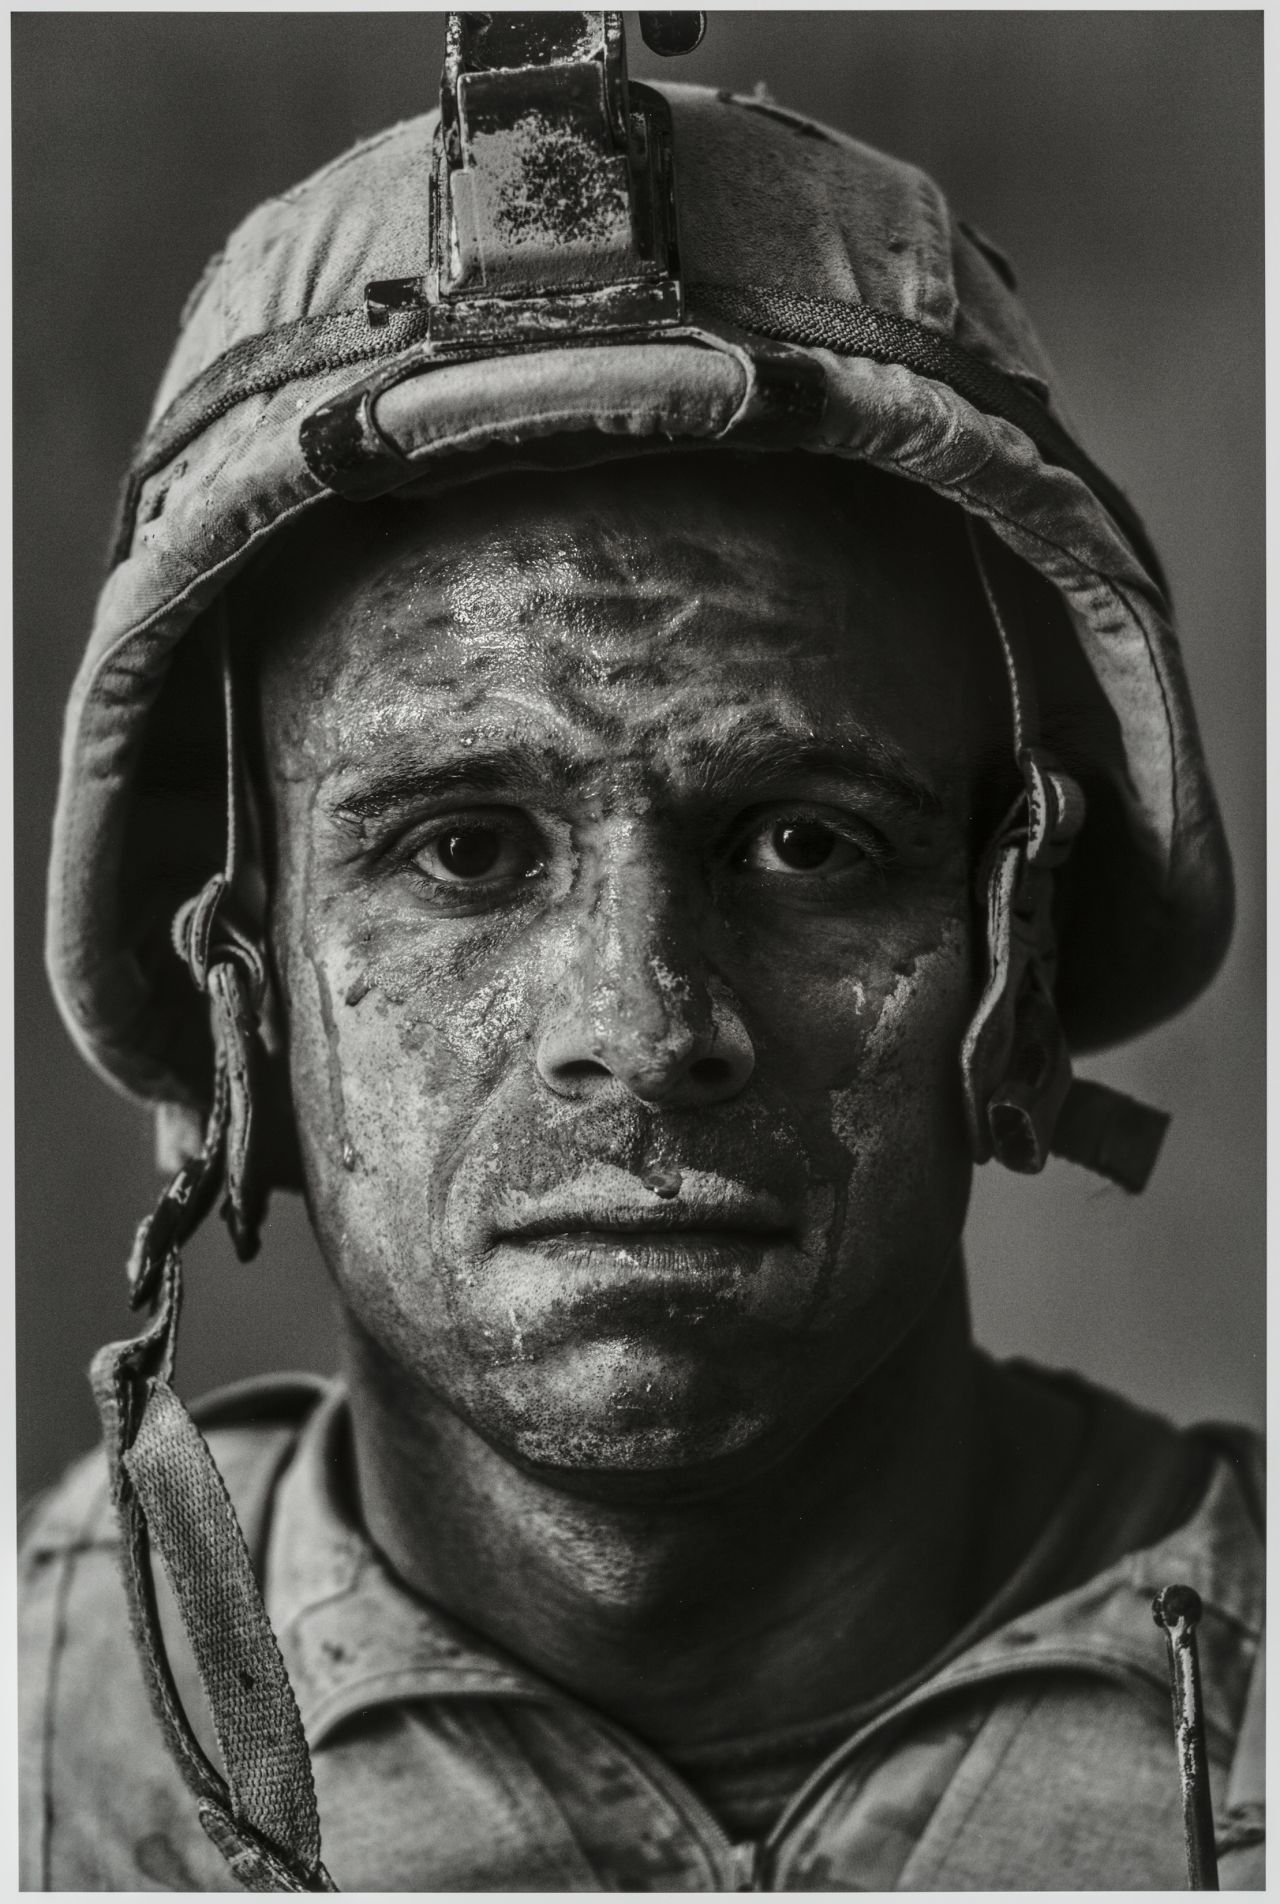 This photo by Canadian photojournalist Louie Palu was taken inside an empty bunker turned into a makeshift studio in Afghanistan.